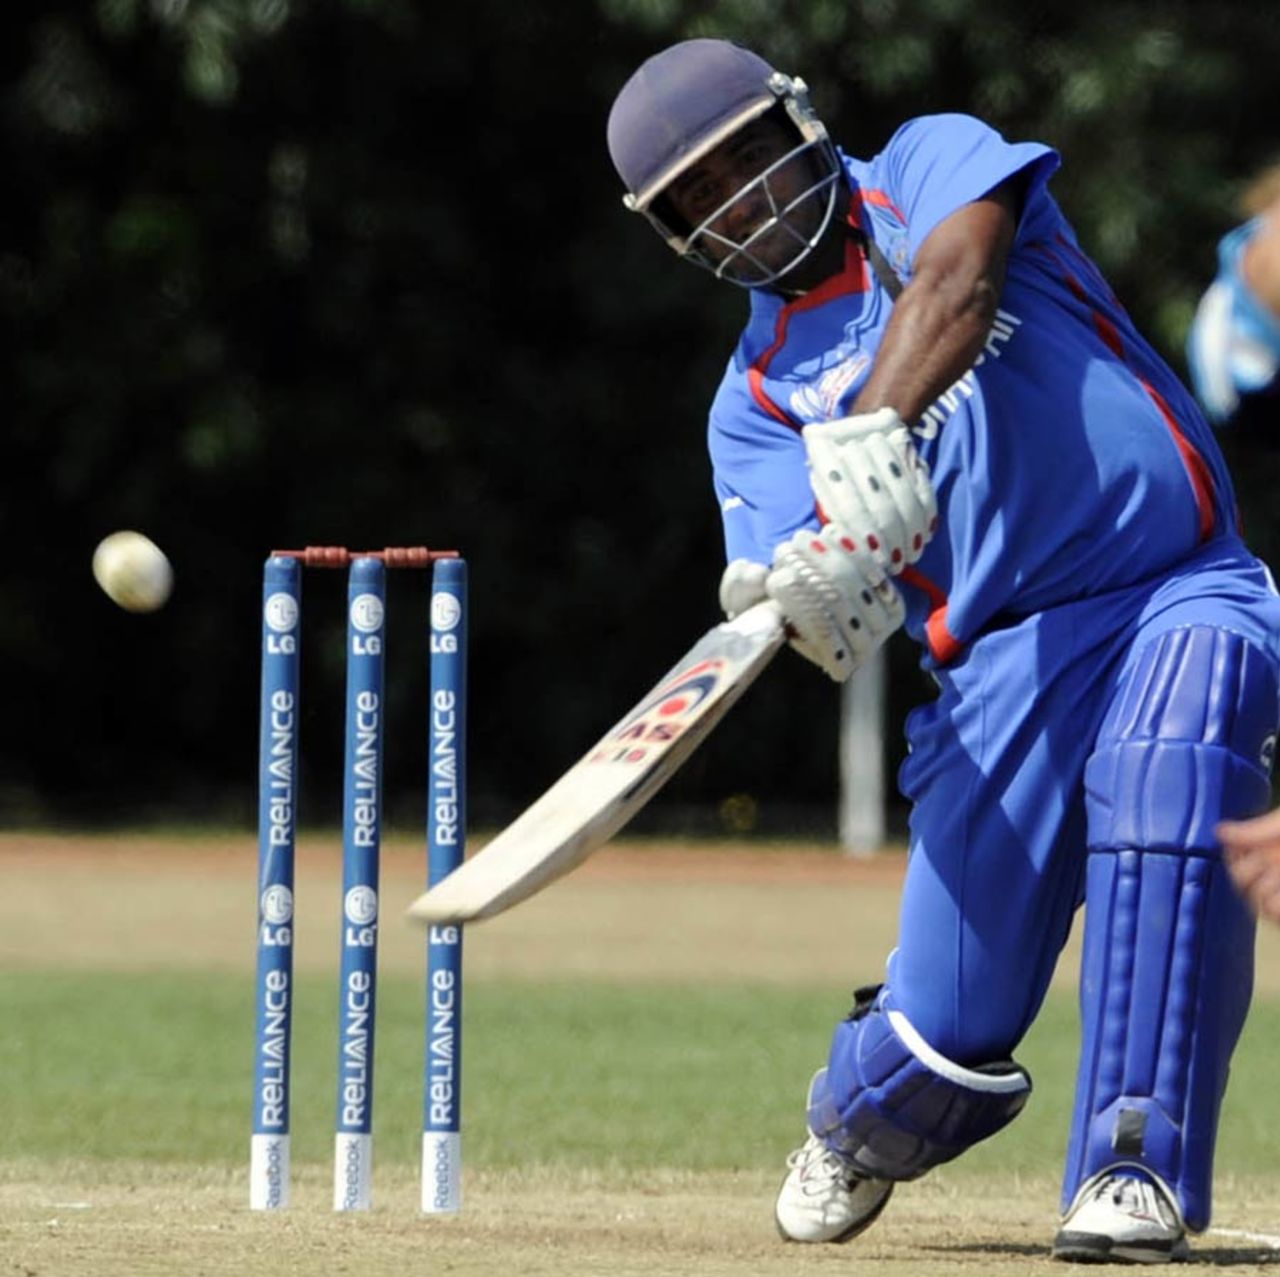 Aghanistan's Mohammad Shahzad hit out, Afghanistan v Scotland, ICC WCL Division 1, Rotterdam, July 9, 2010 